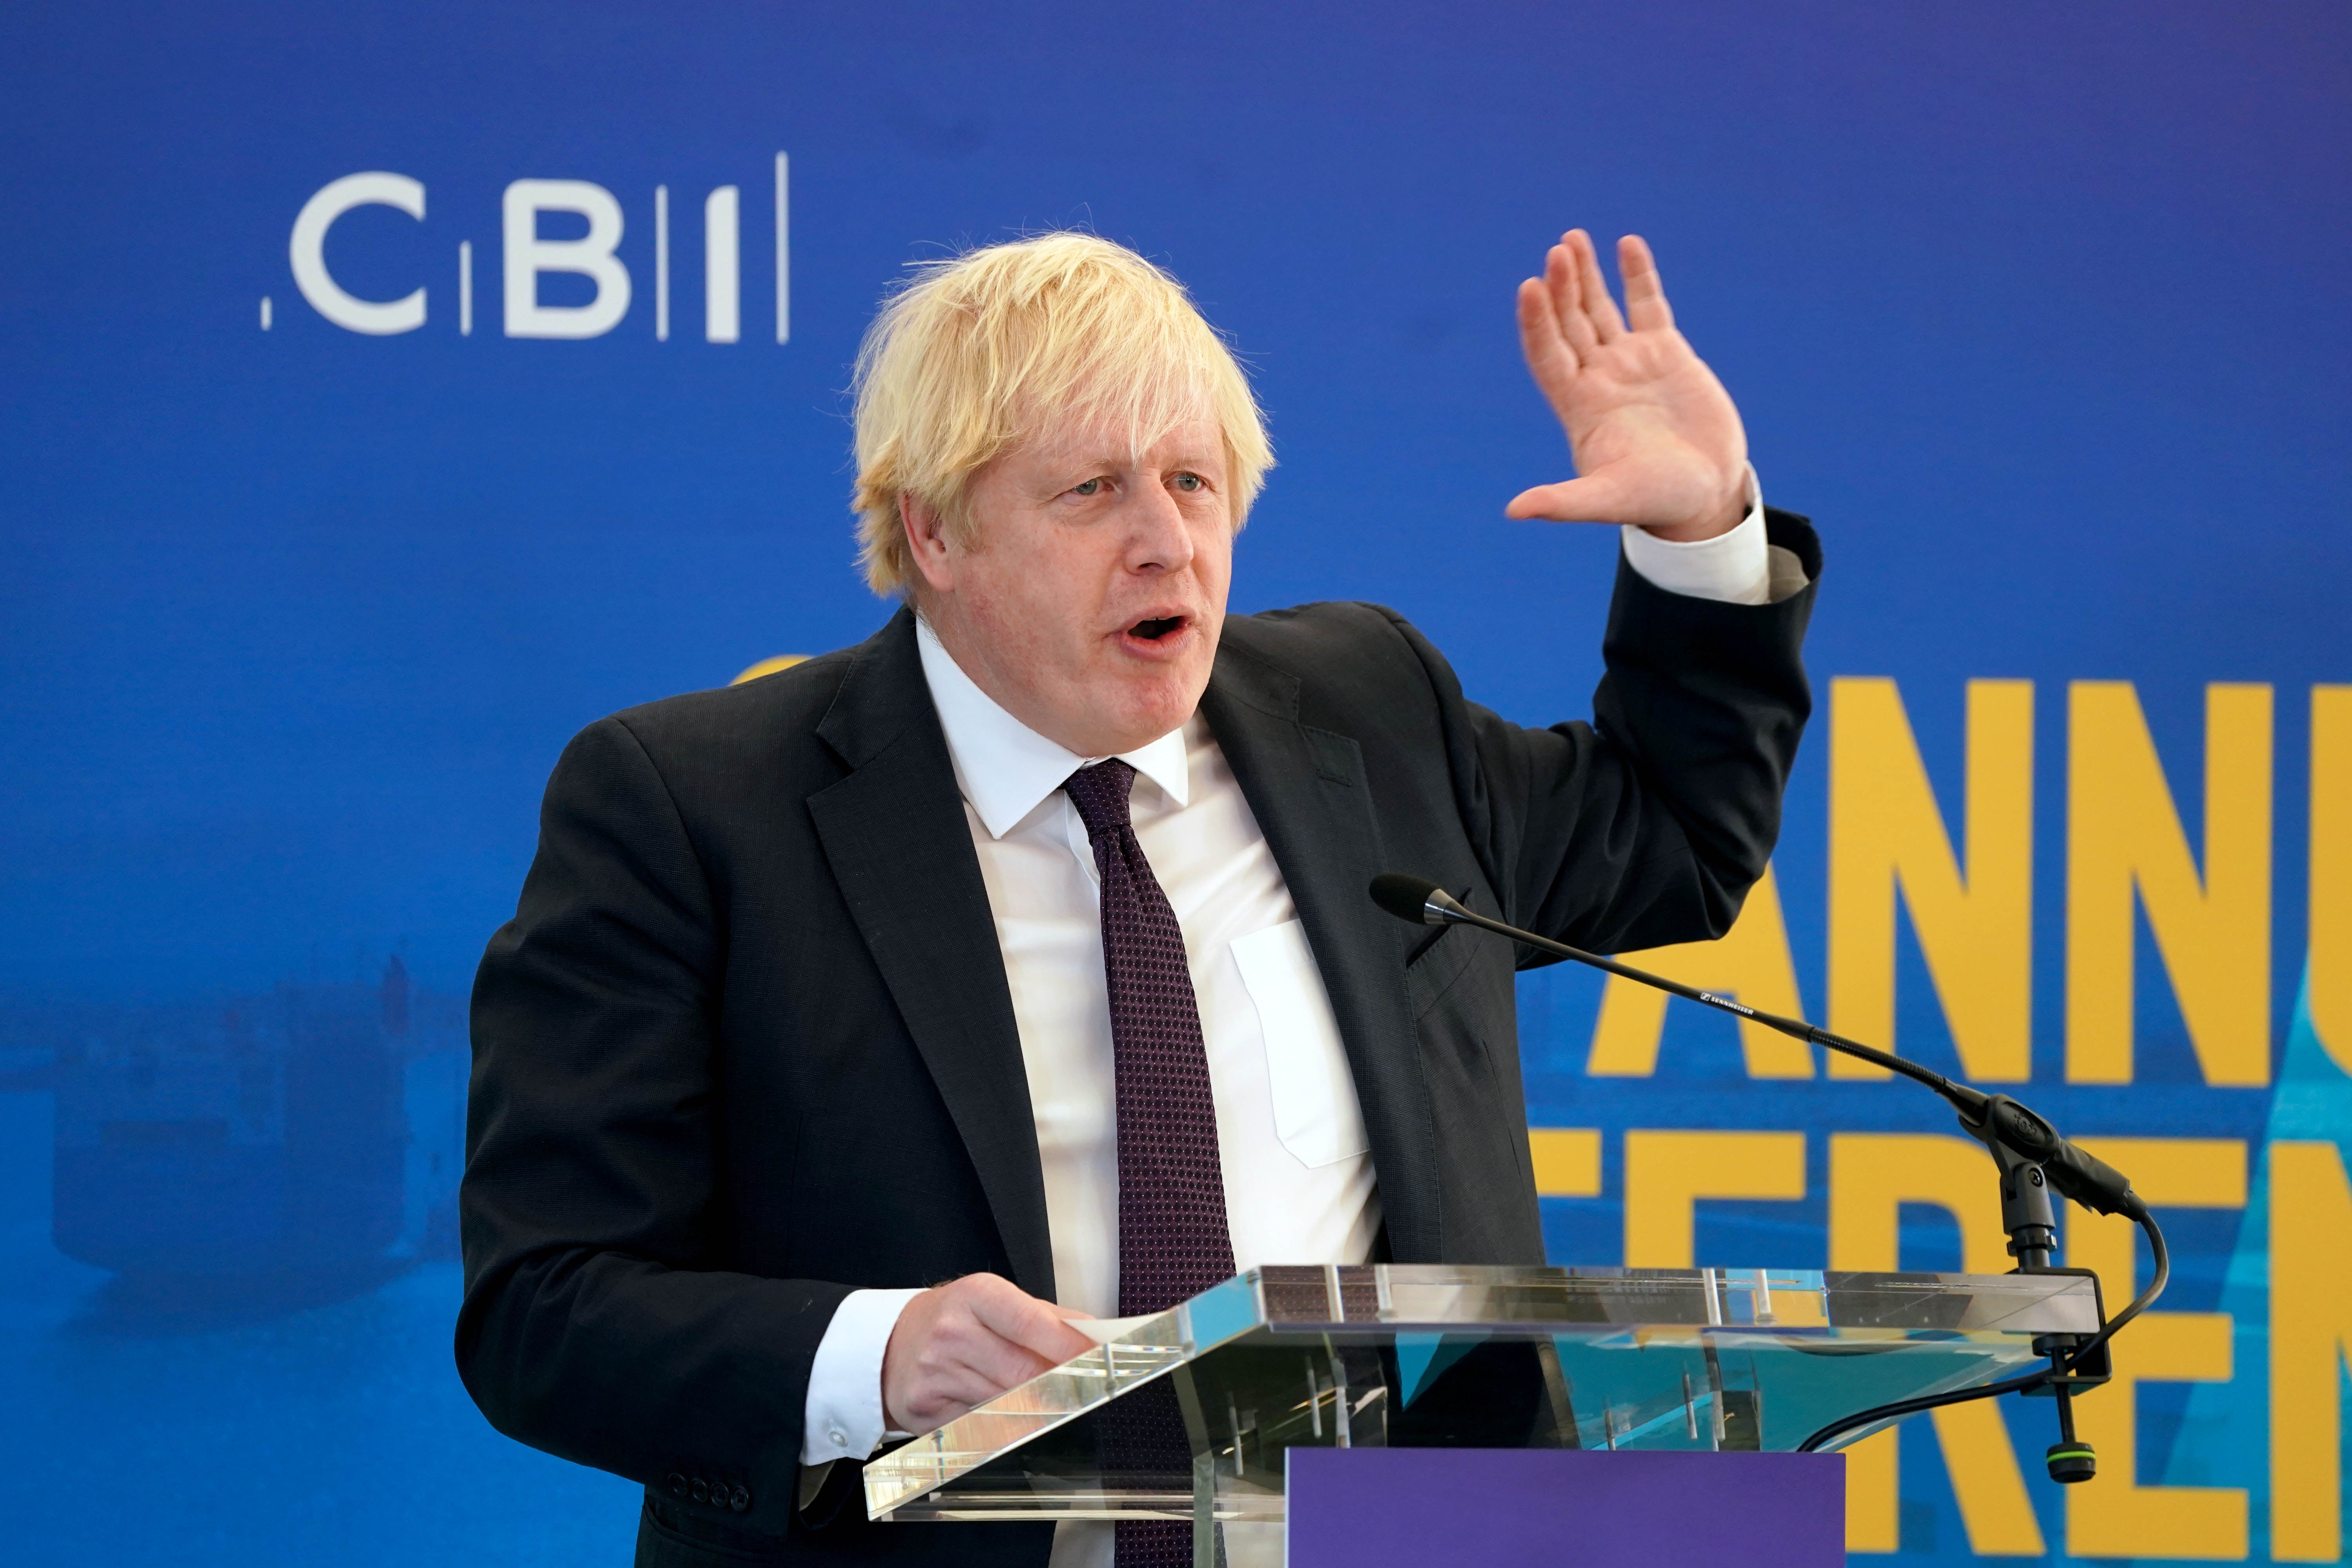 Boris Johnson speaking at the annual conference of the Confederation of British Industry last month